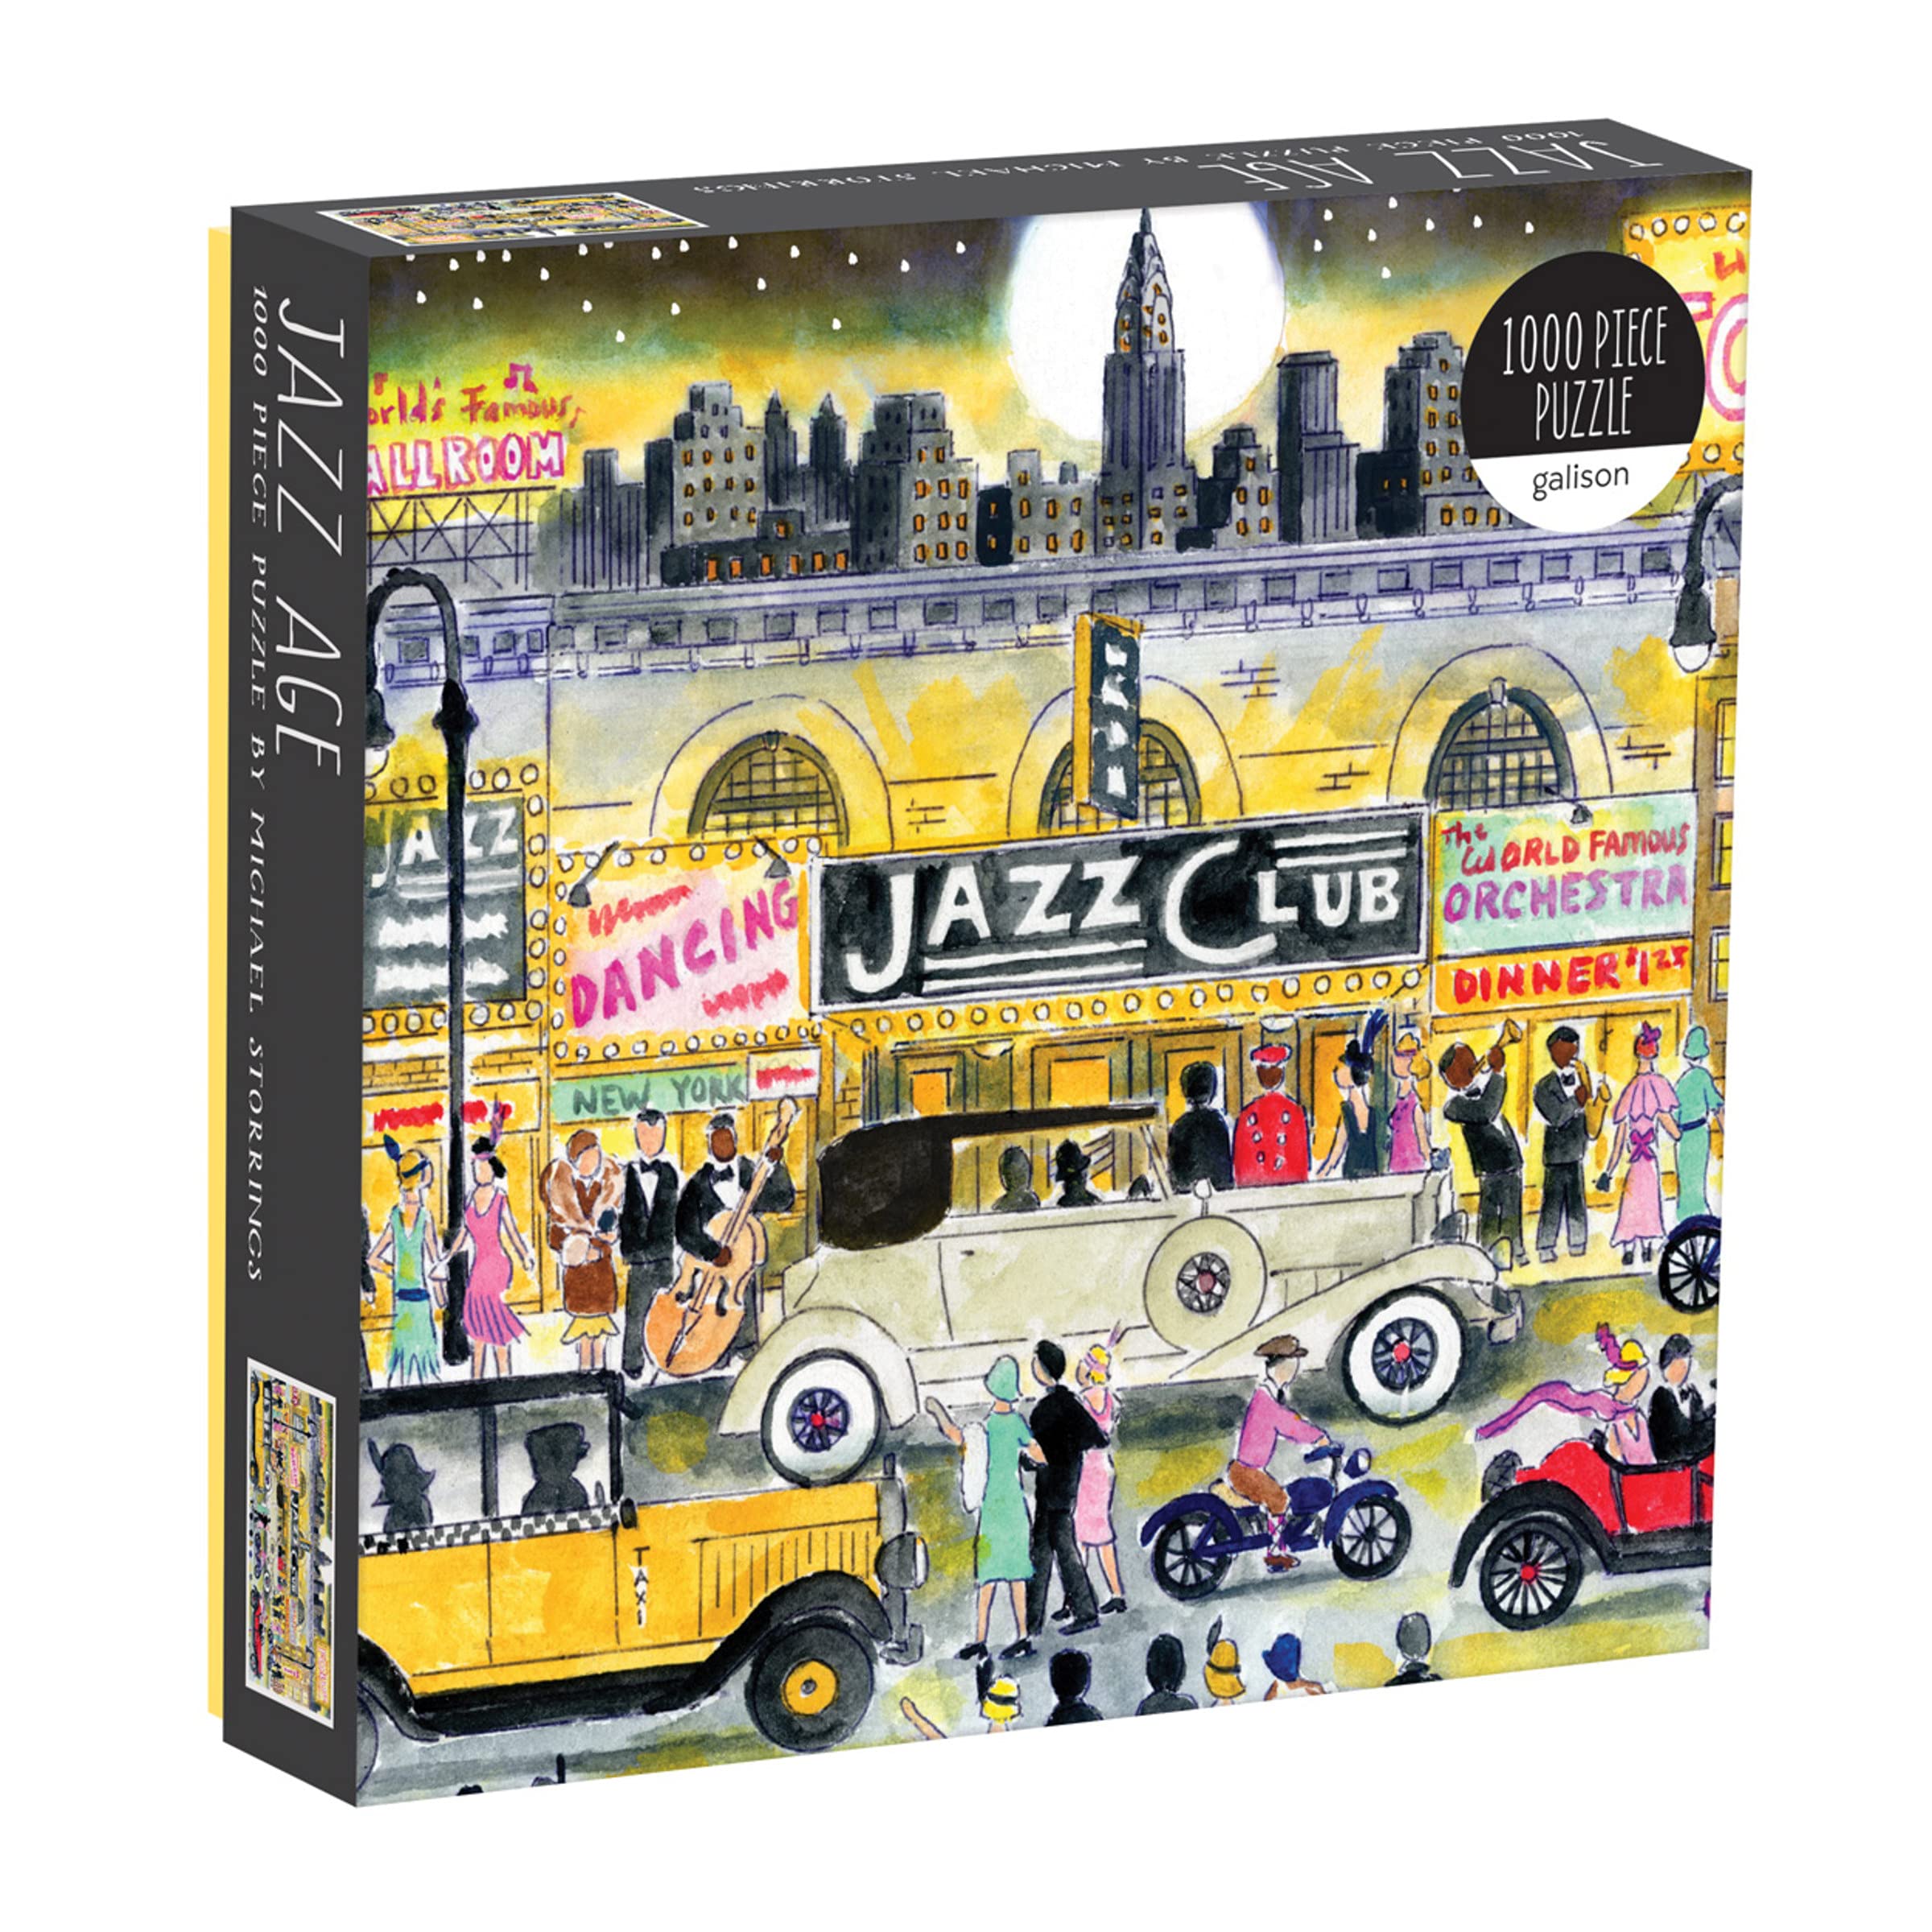 1000-Piece Galison Michael Storrings Jazz Age Jigsaw Puzzle $4.23 + Free Shipping w/ Prime or on orders over $35